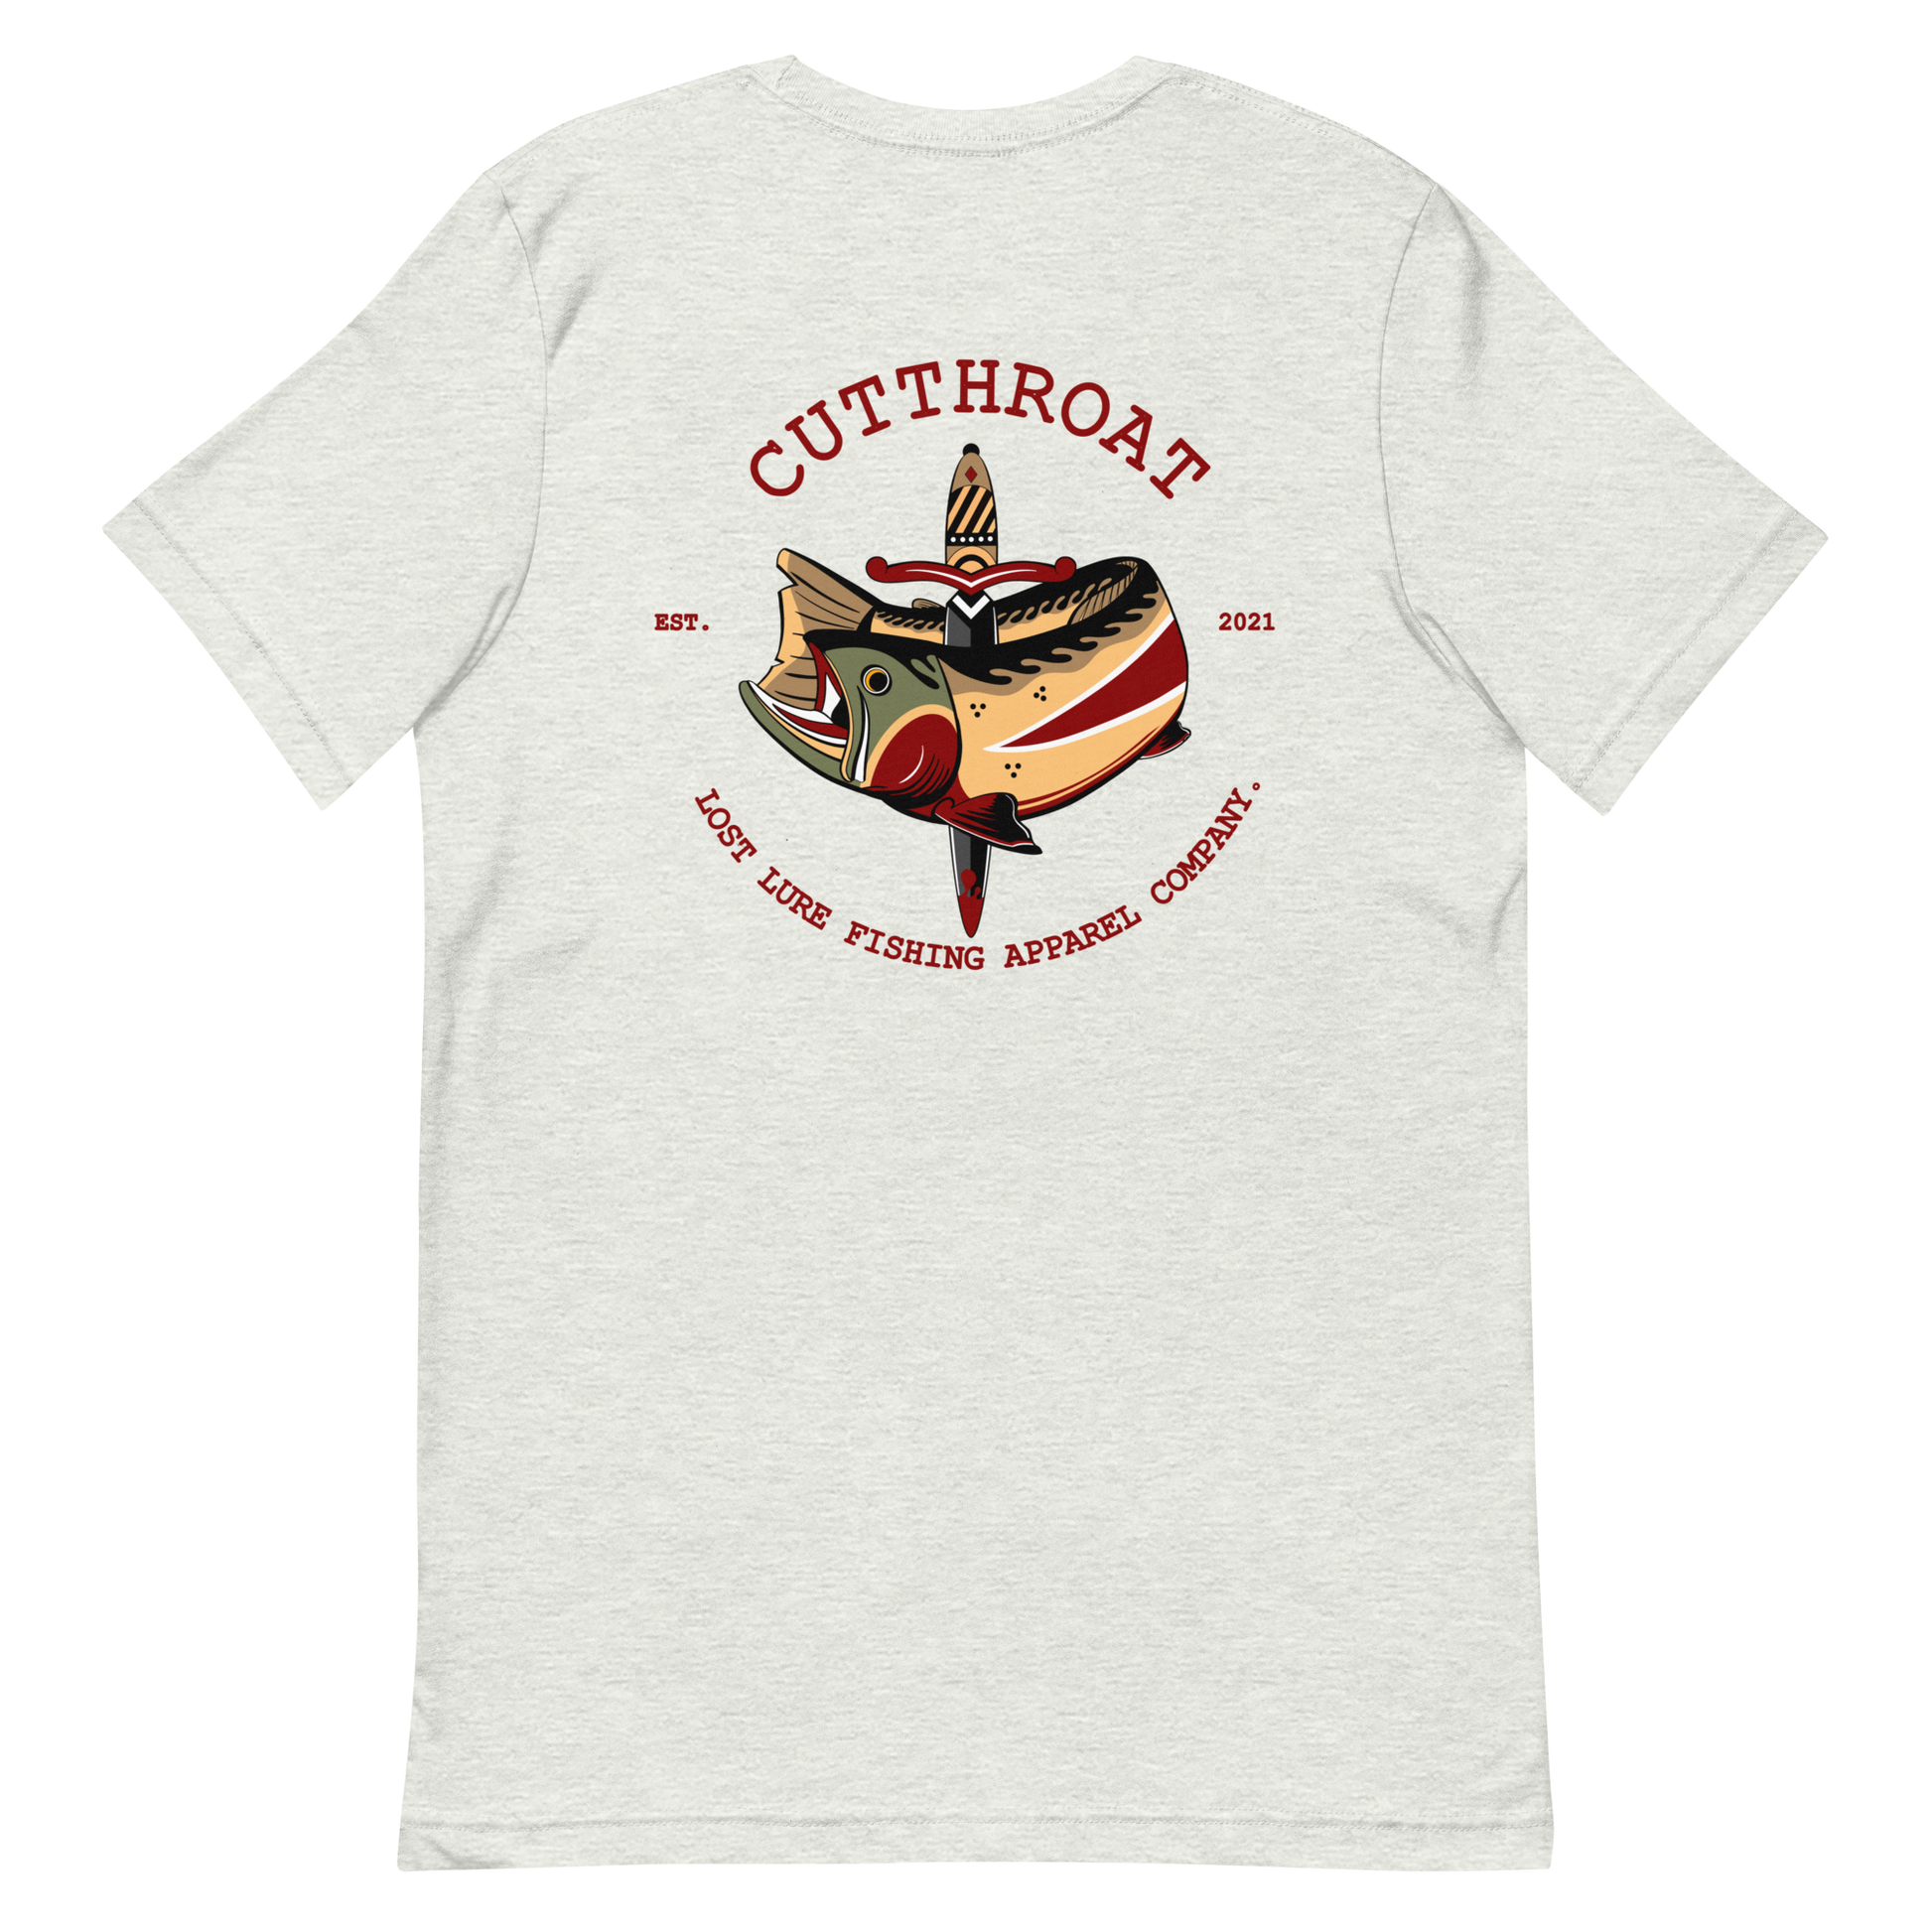 Cutthroat Trout fishing shirt. It’s an American traditional style design with a cutthroat trout and a dagger. The shirt reads Cutthroat trout, est. 2021, lost lure fishing apparel company. The front of the shirt has the lost lure logo. Crème color fishing shirt, back side